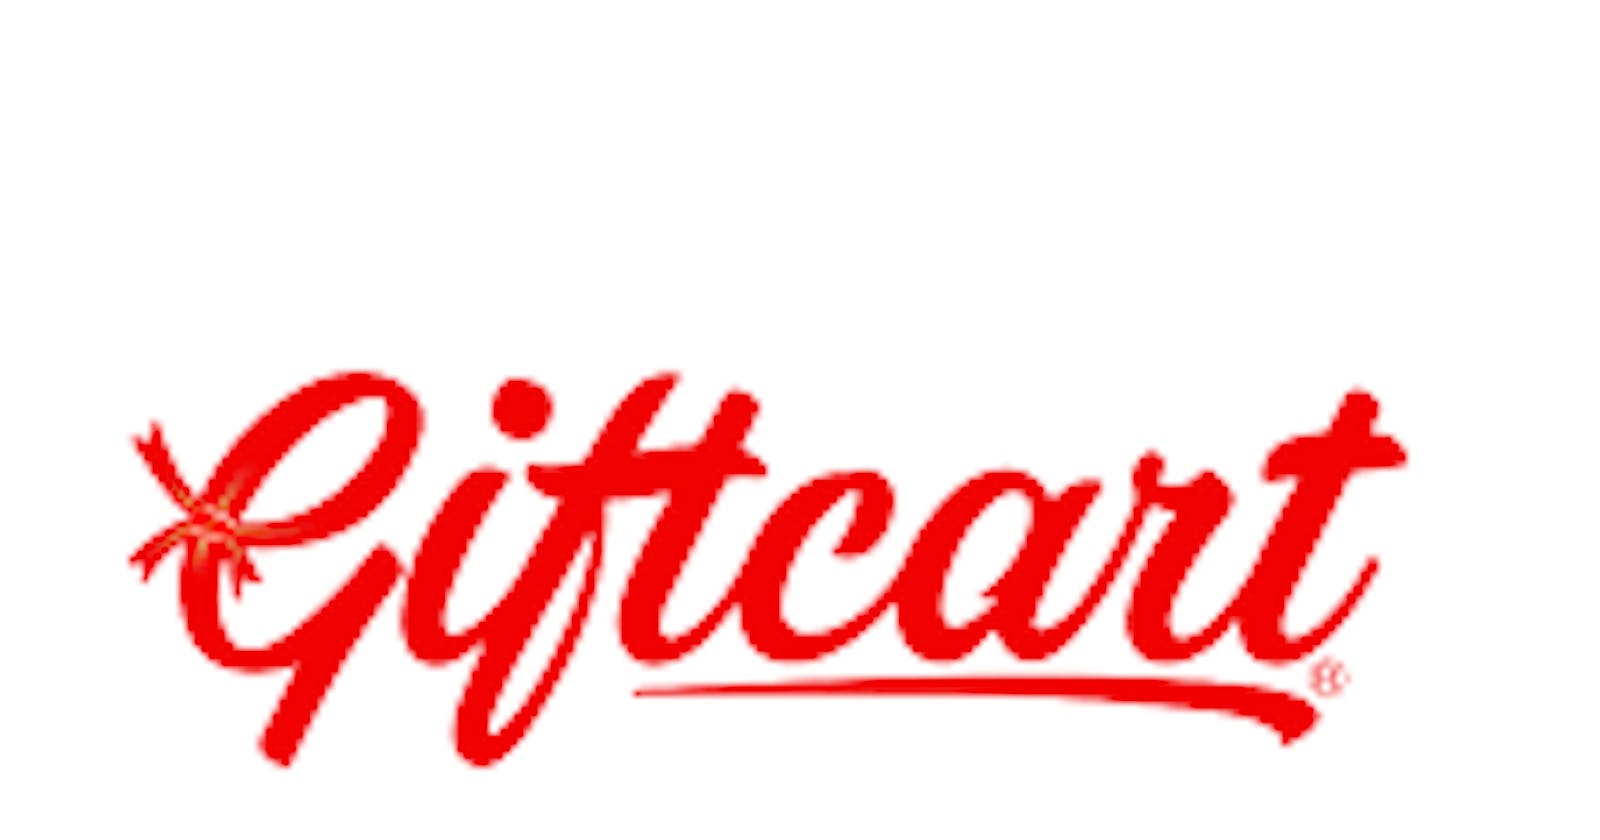 Creating a Clone of- "Giftcart.com"